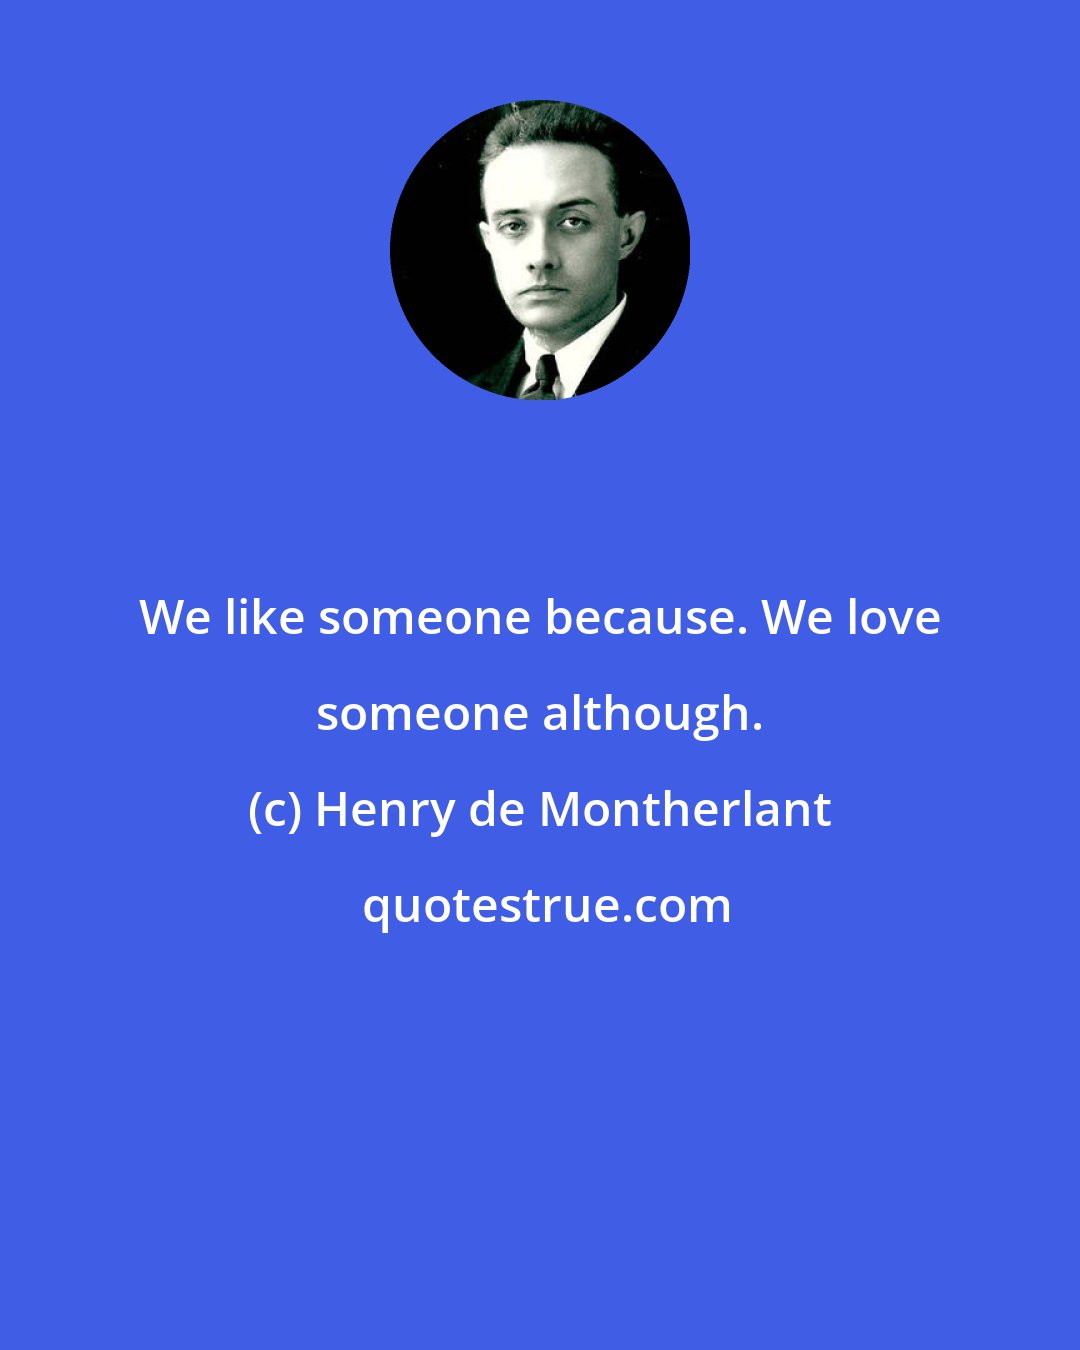 Henry de Montherlant: We like someone because. We love someone although.